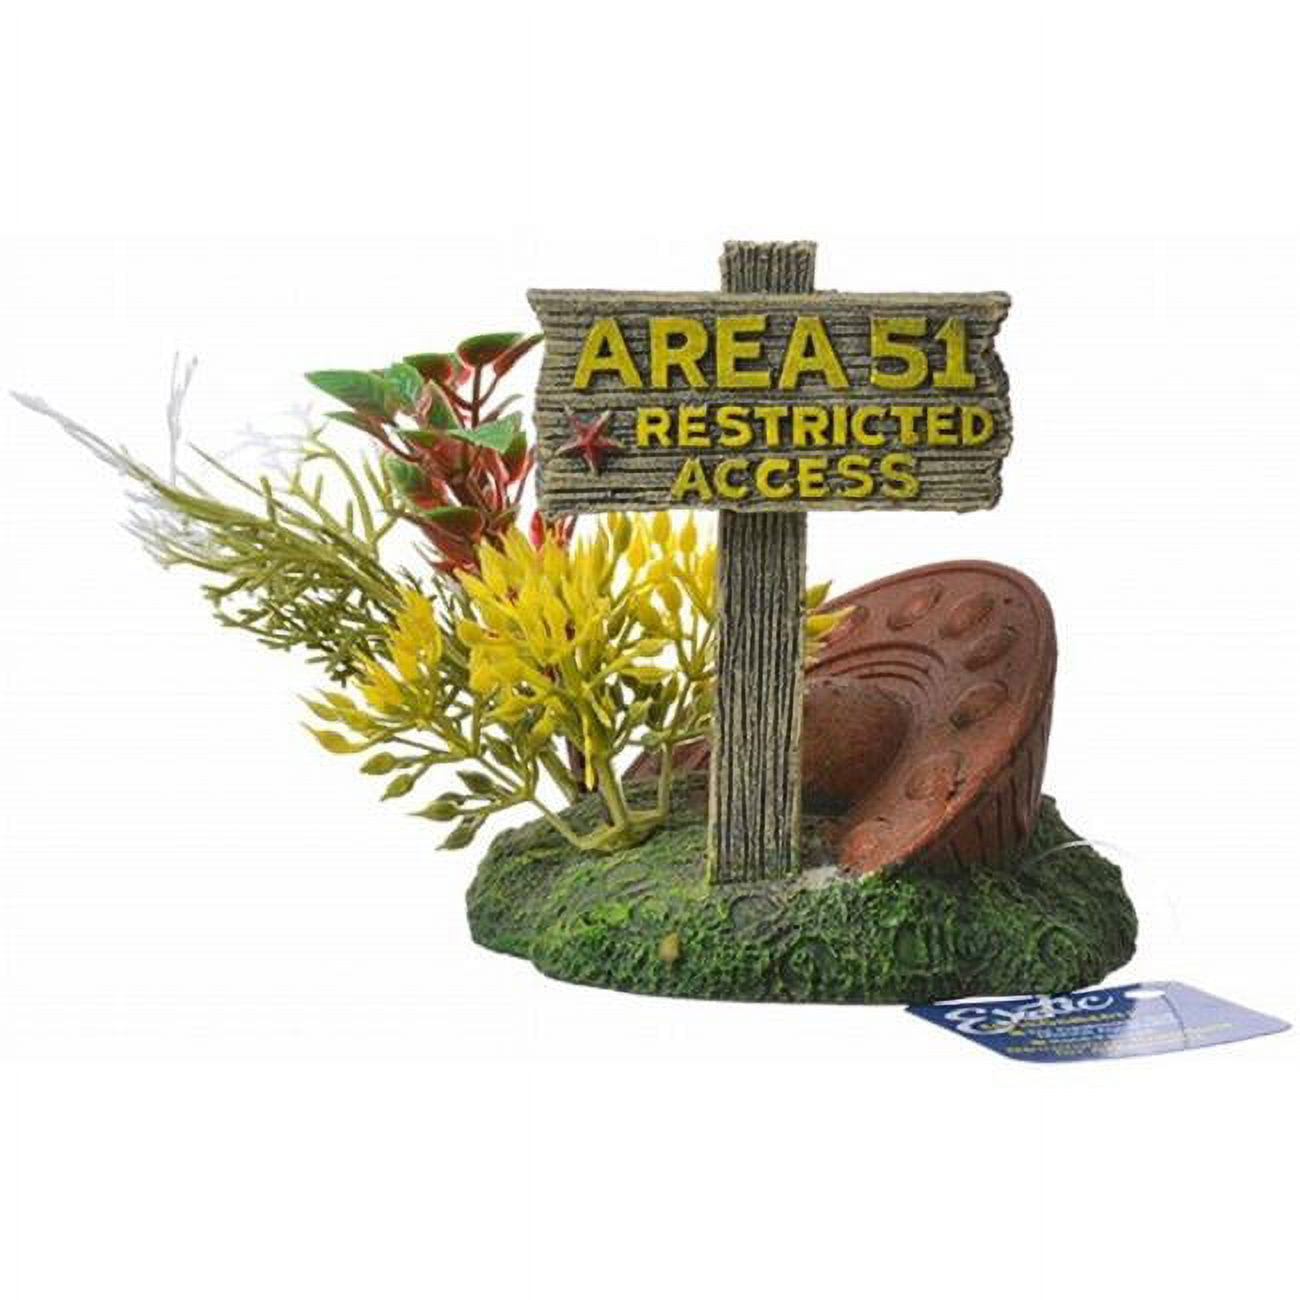 Picture of Blue Ribbon Pet Products 006166 Exotic Environments Area 51 Sign with UFO